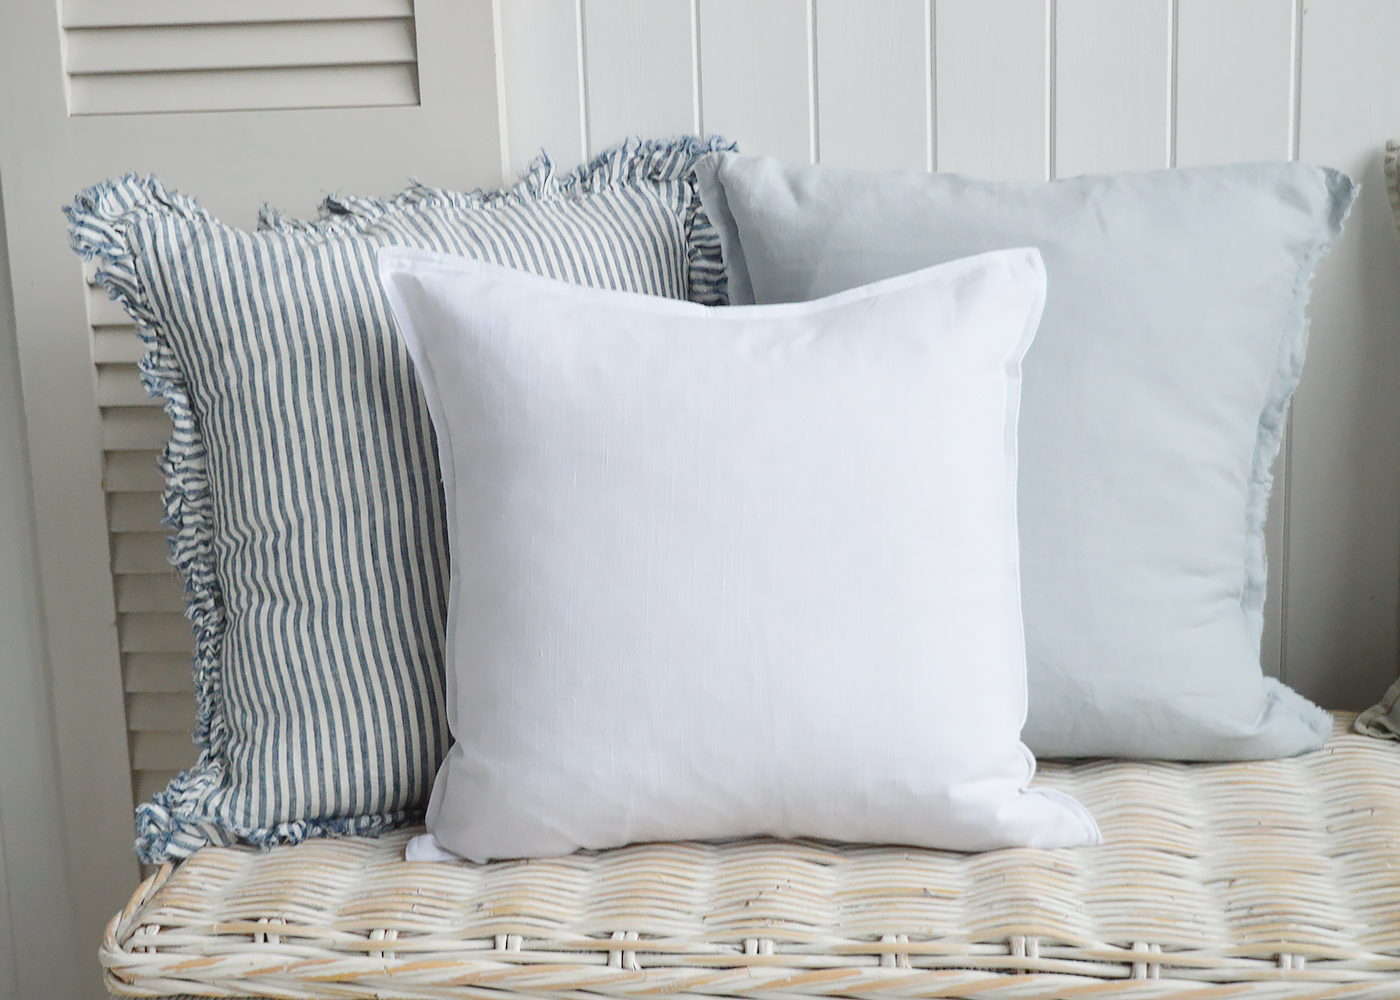 Hamilton white linen cushion cover with shades of blue